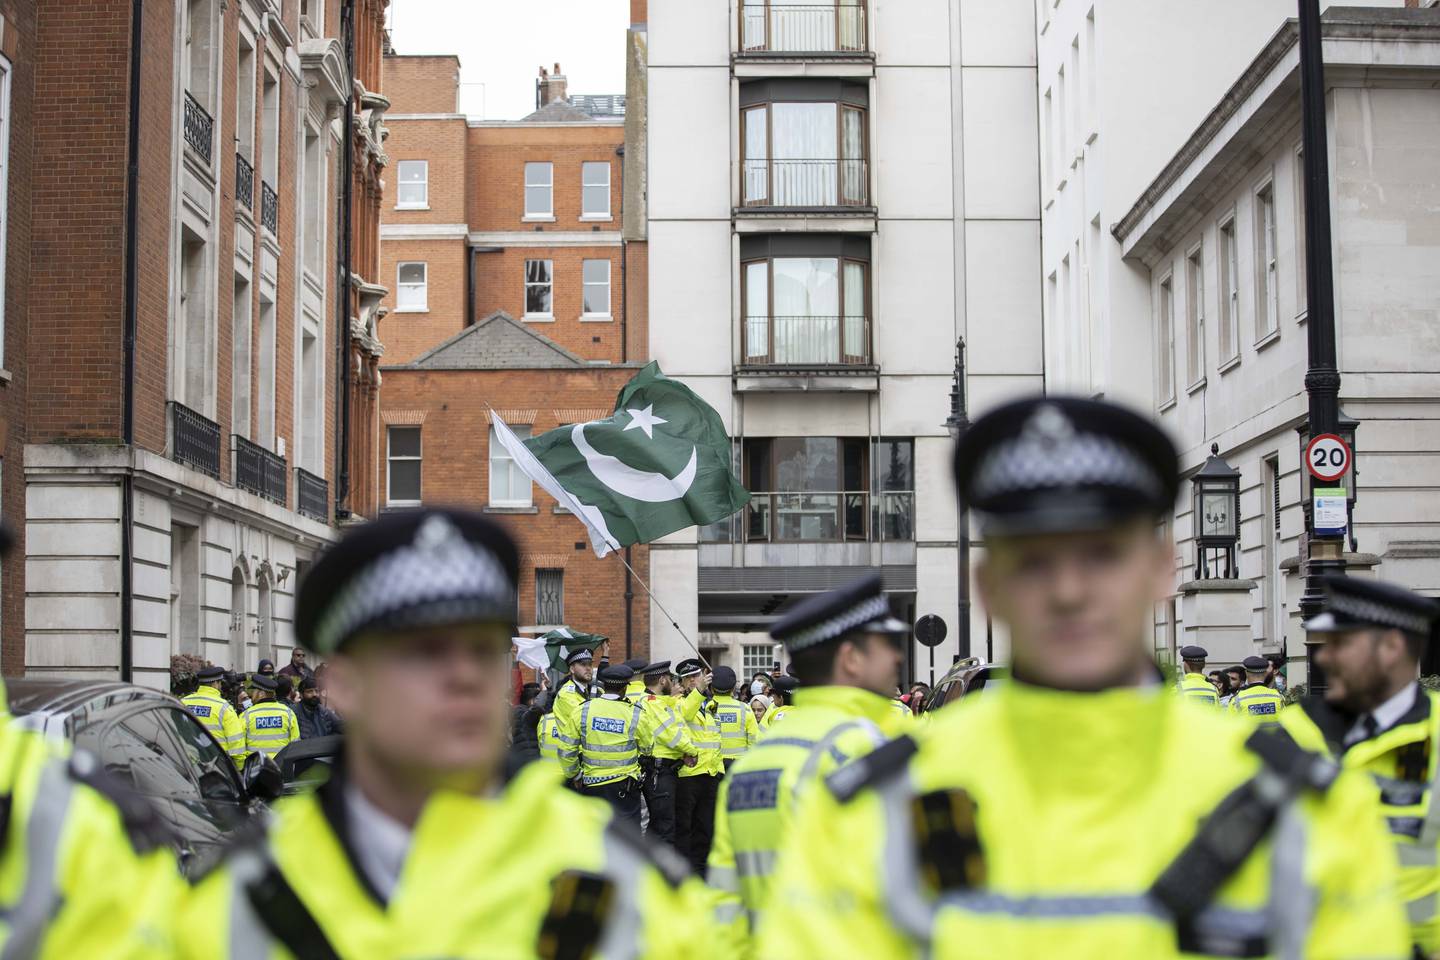 Police officers watch as a protest is staged in front of the house of Nawaz Sharif in London. Getty Images